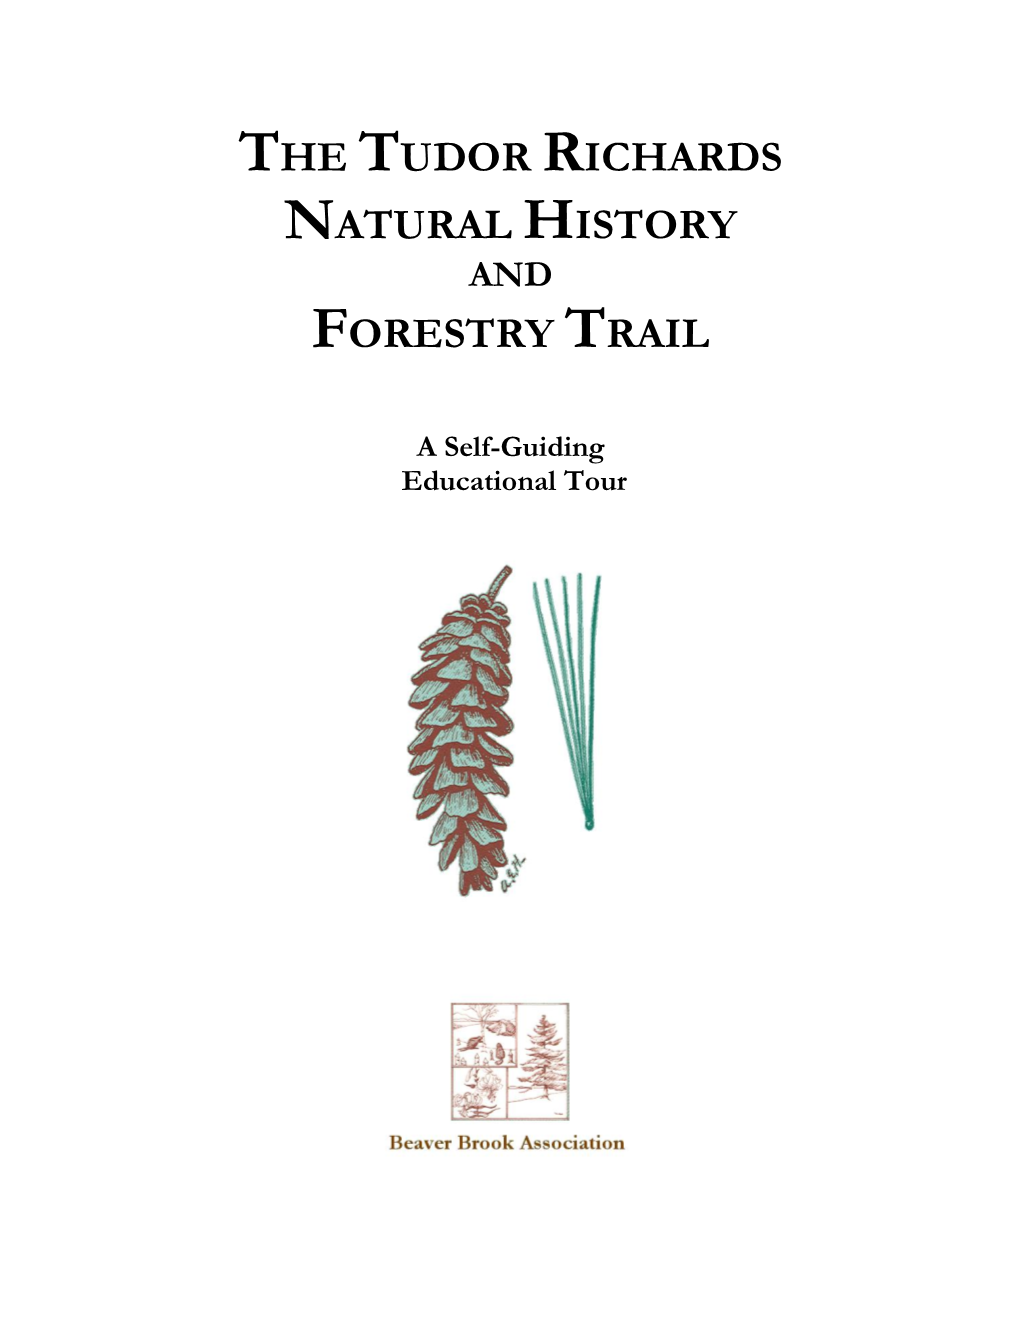 The Tudor Richards Natural History and Forestry Trail